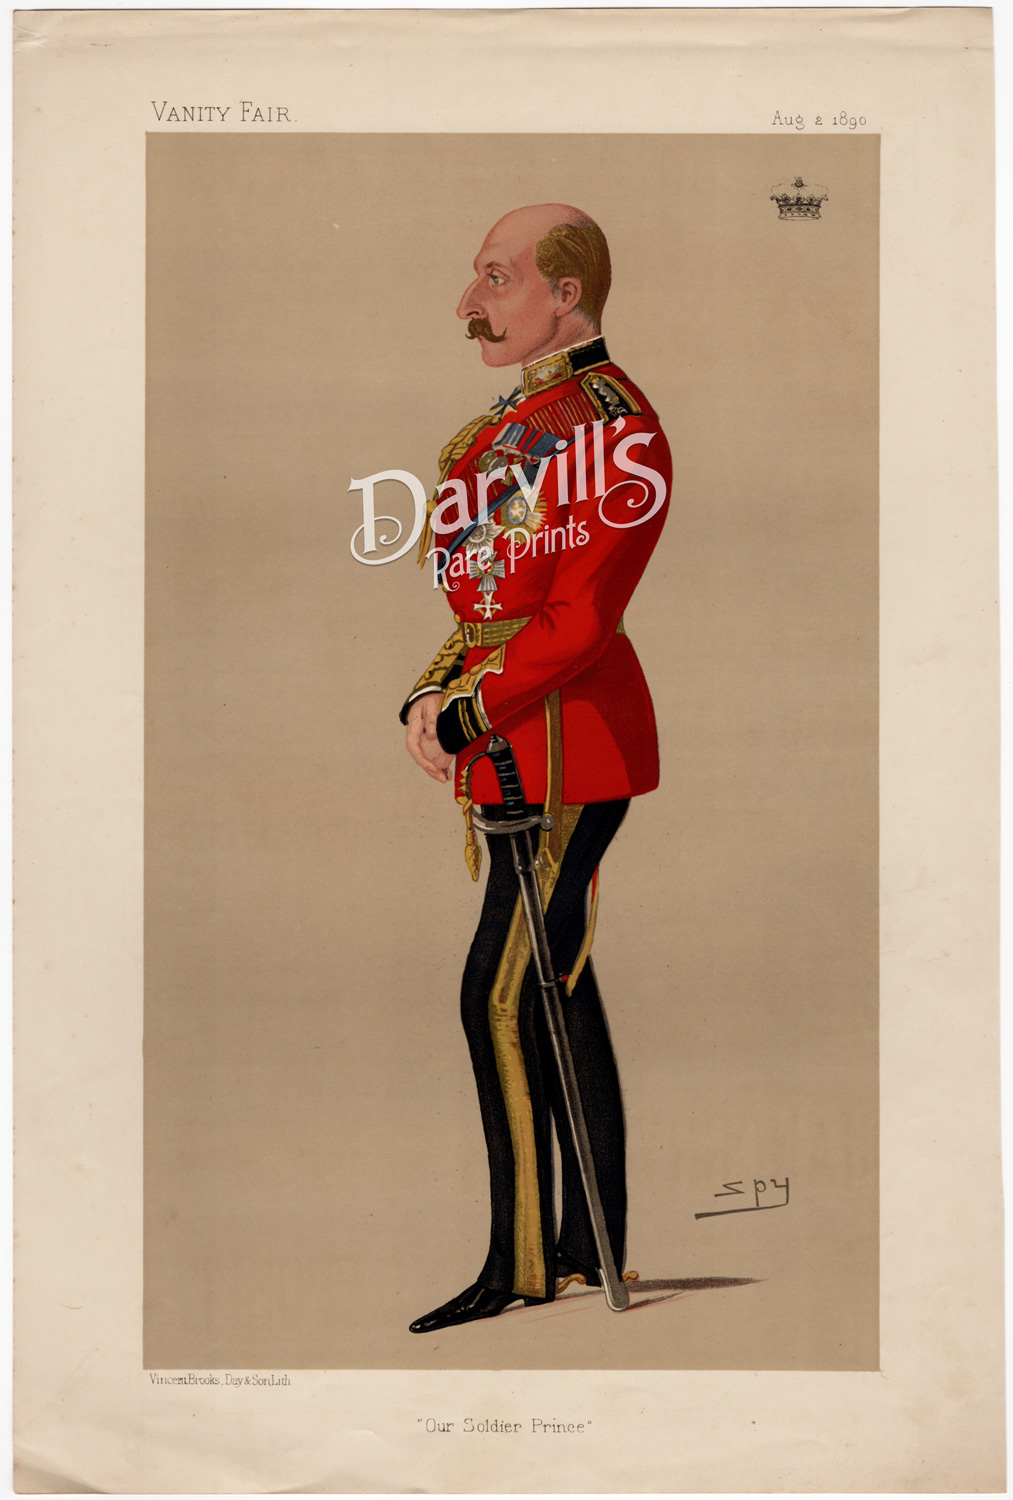 H.R.H. The Duke of Connaught and Strathearn
Aug. 2, 1890